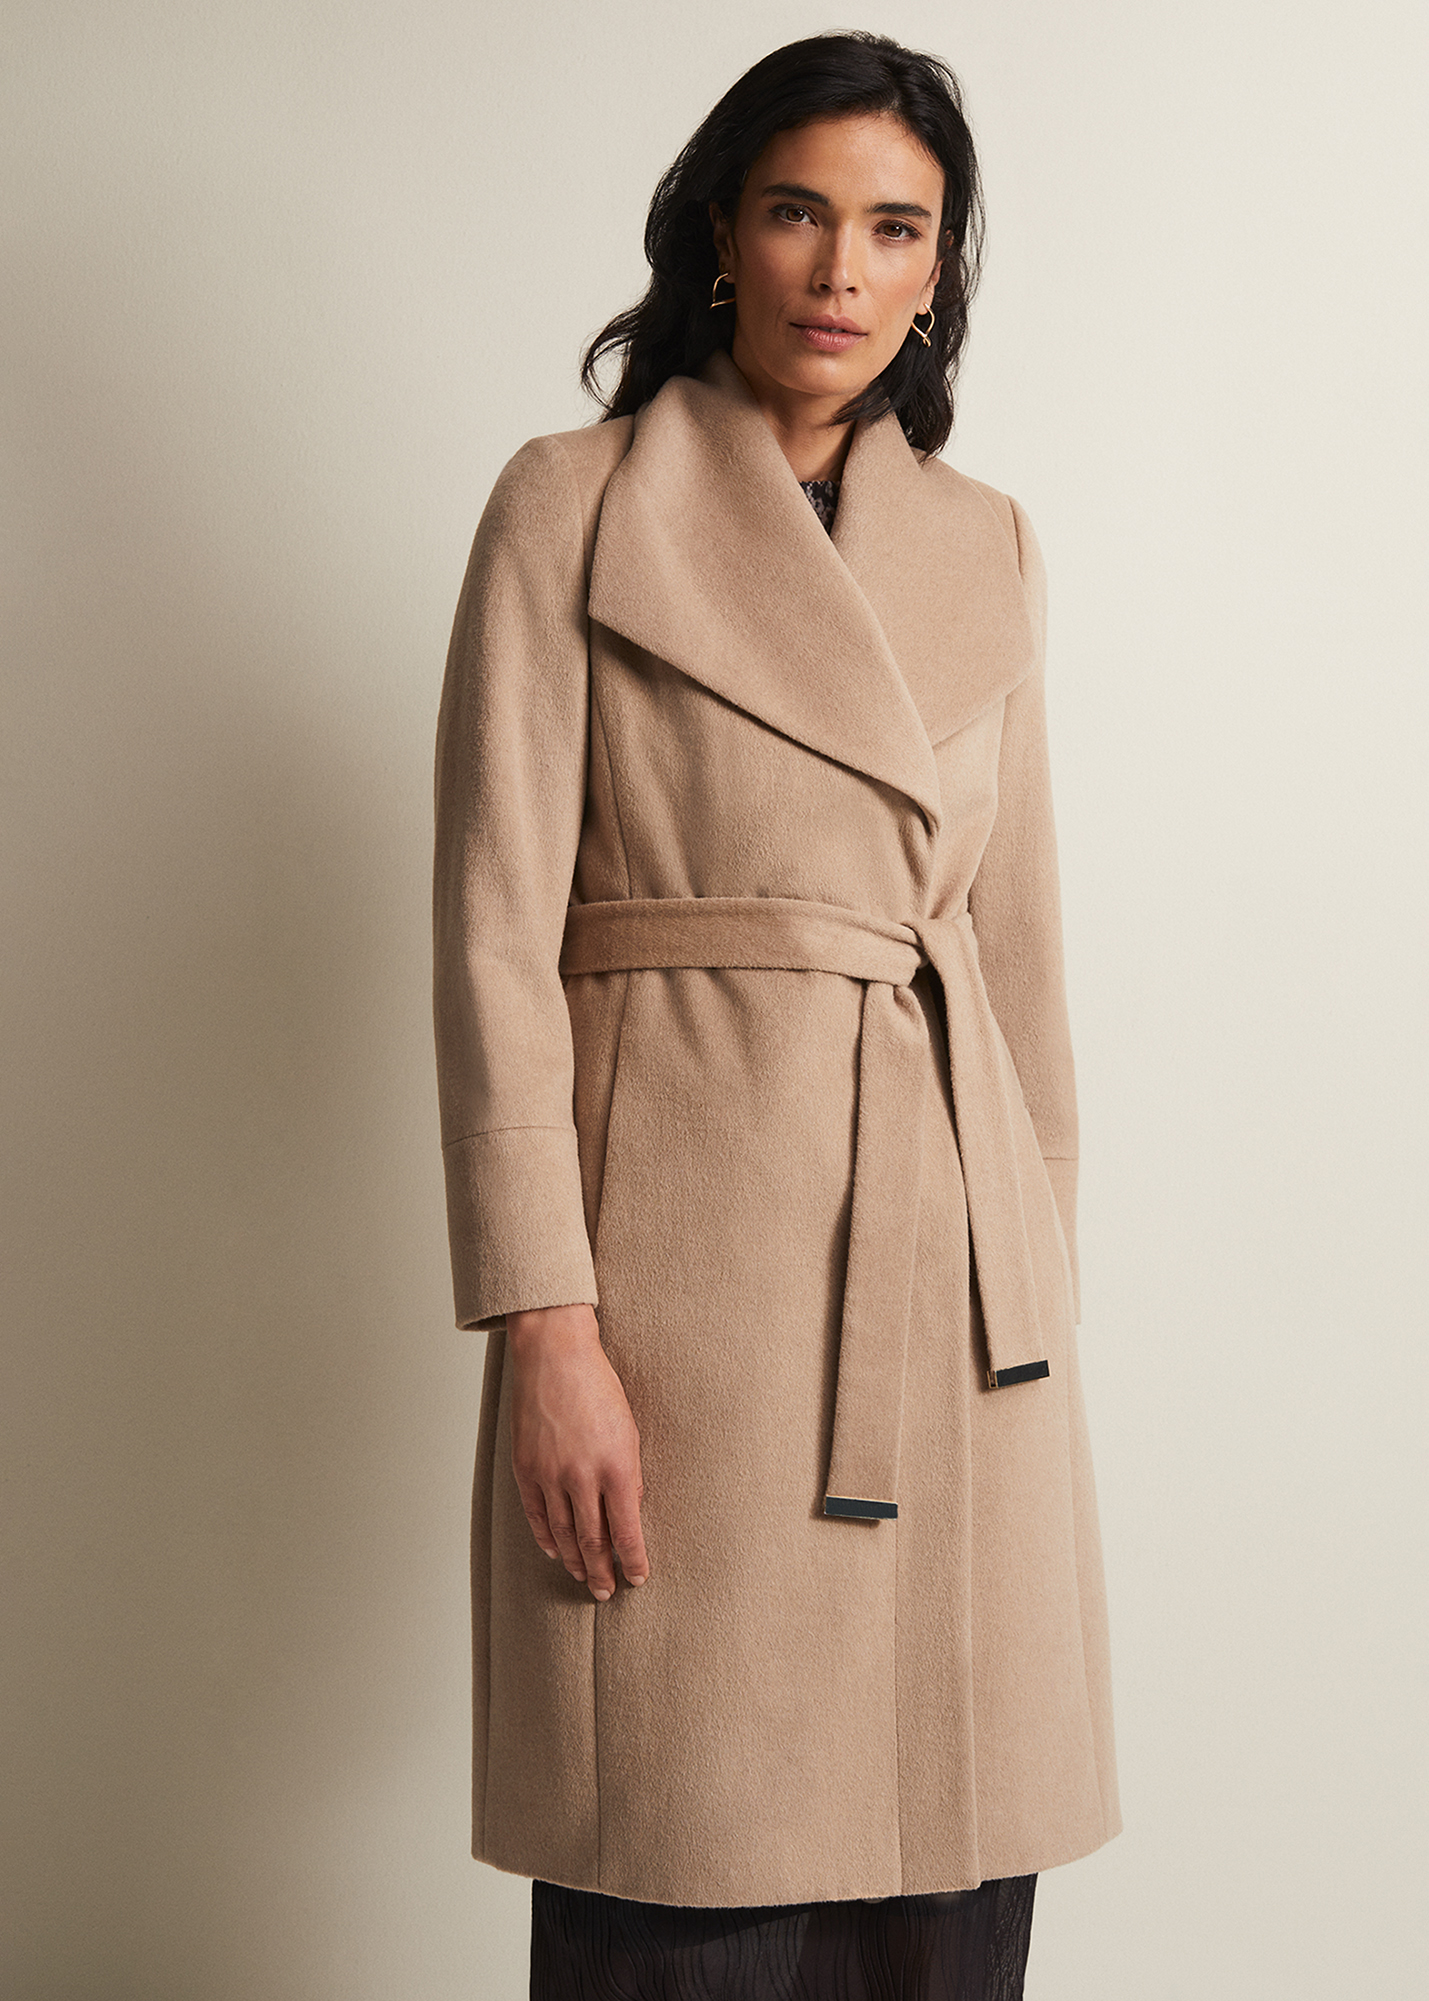 Phase Eight Women's Nicci Camel Wool Belted Coat